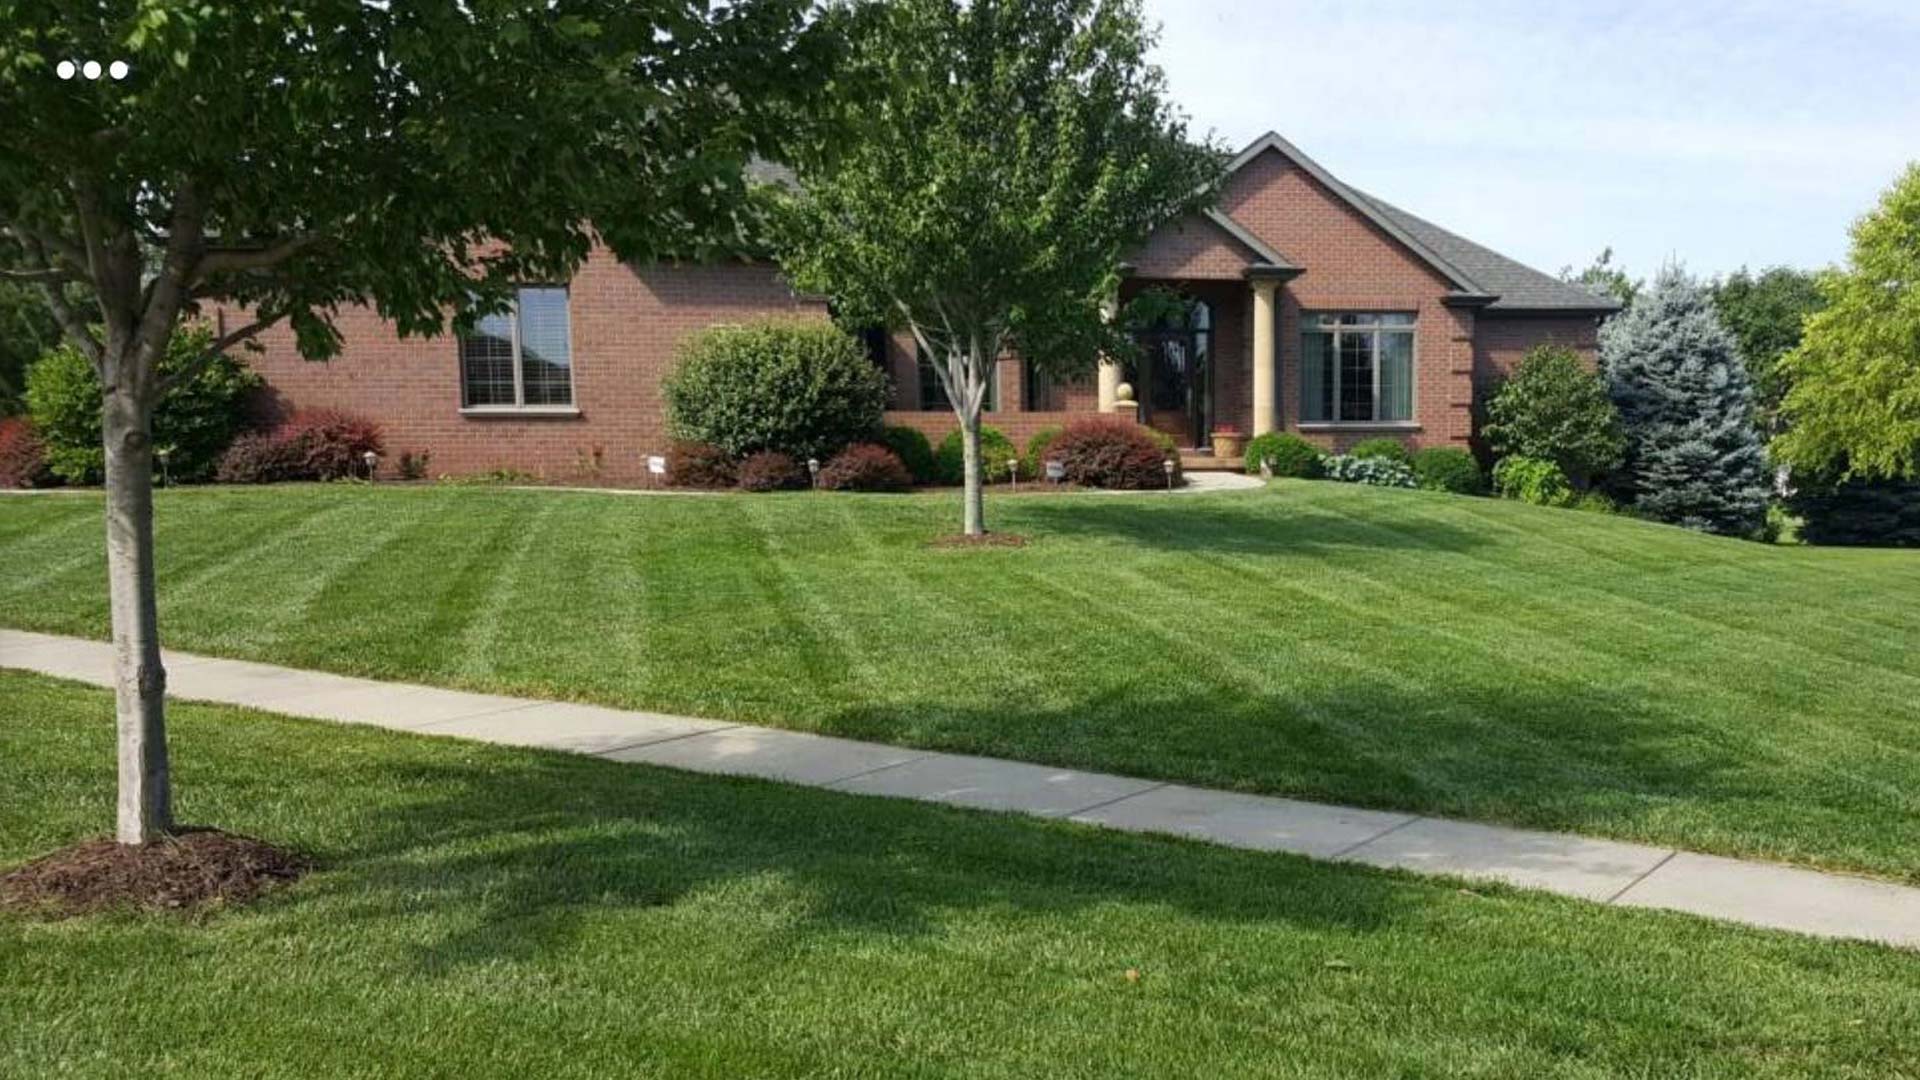 A large residential property in Lincoln, NE that our team maintains the lawn and landscape on a regular basis. 